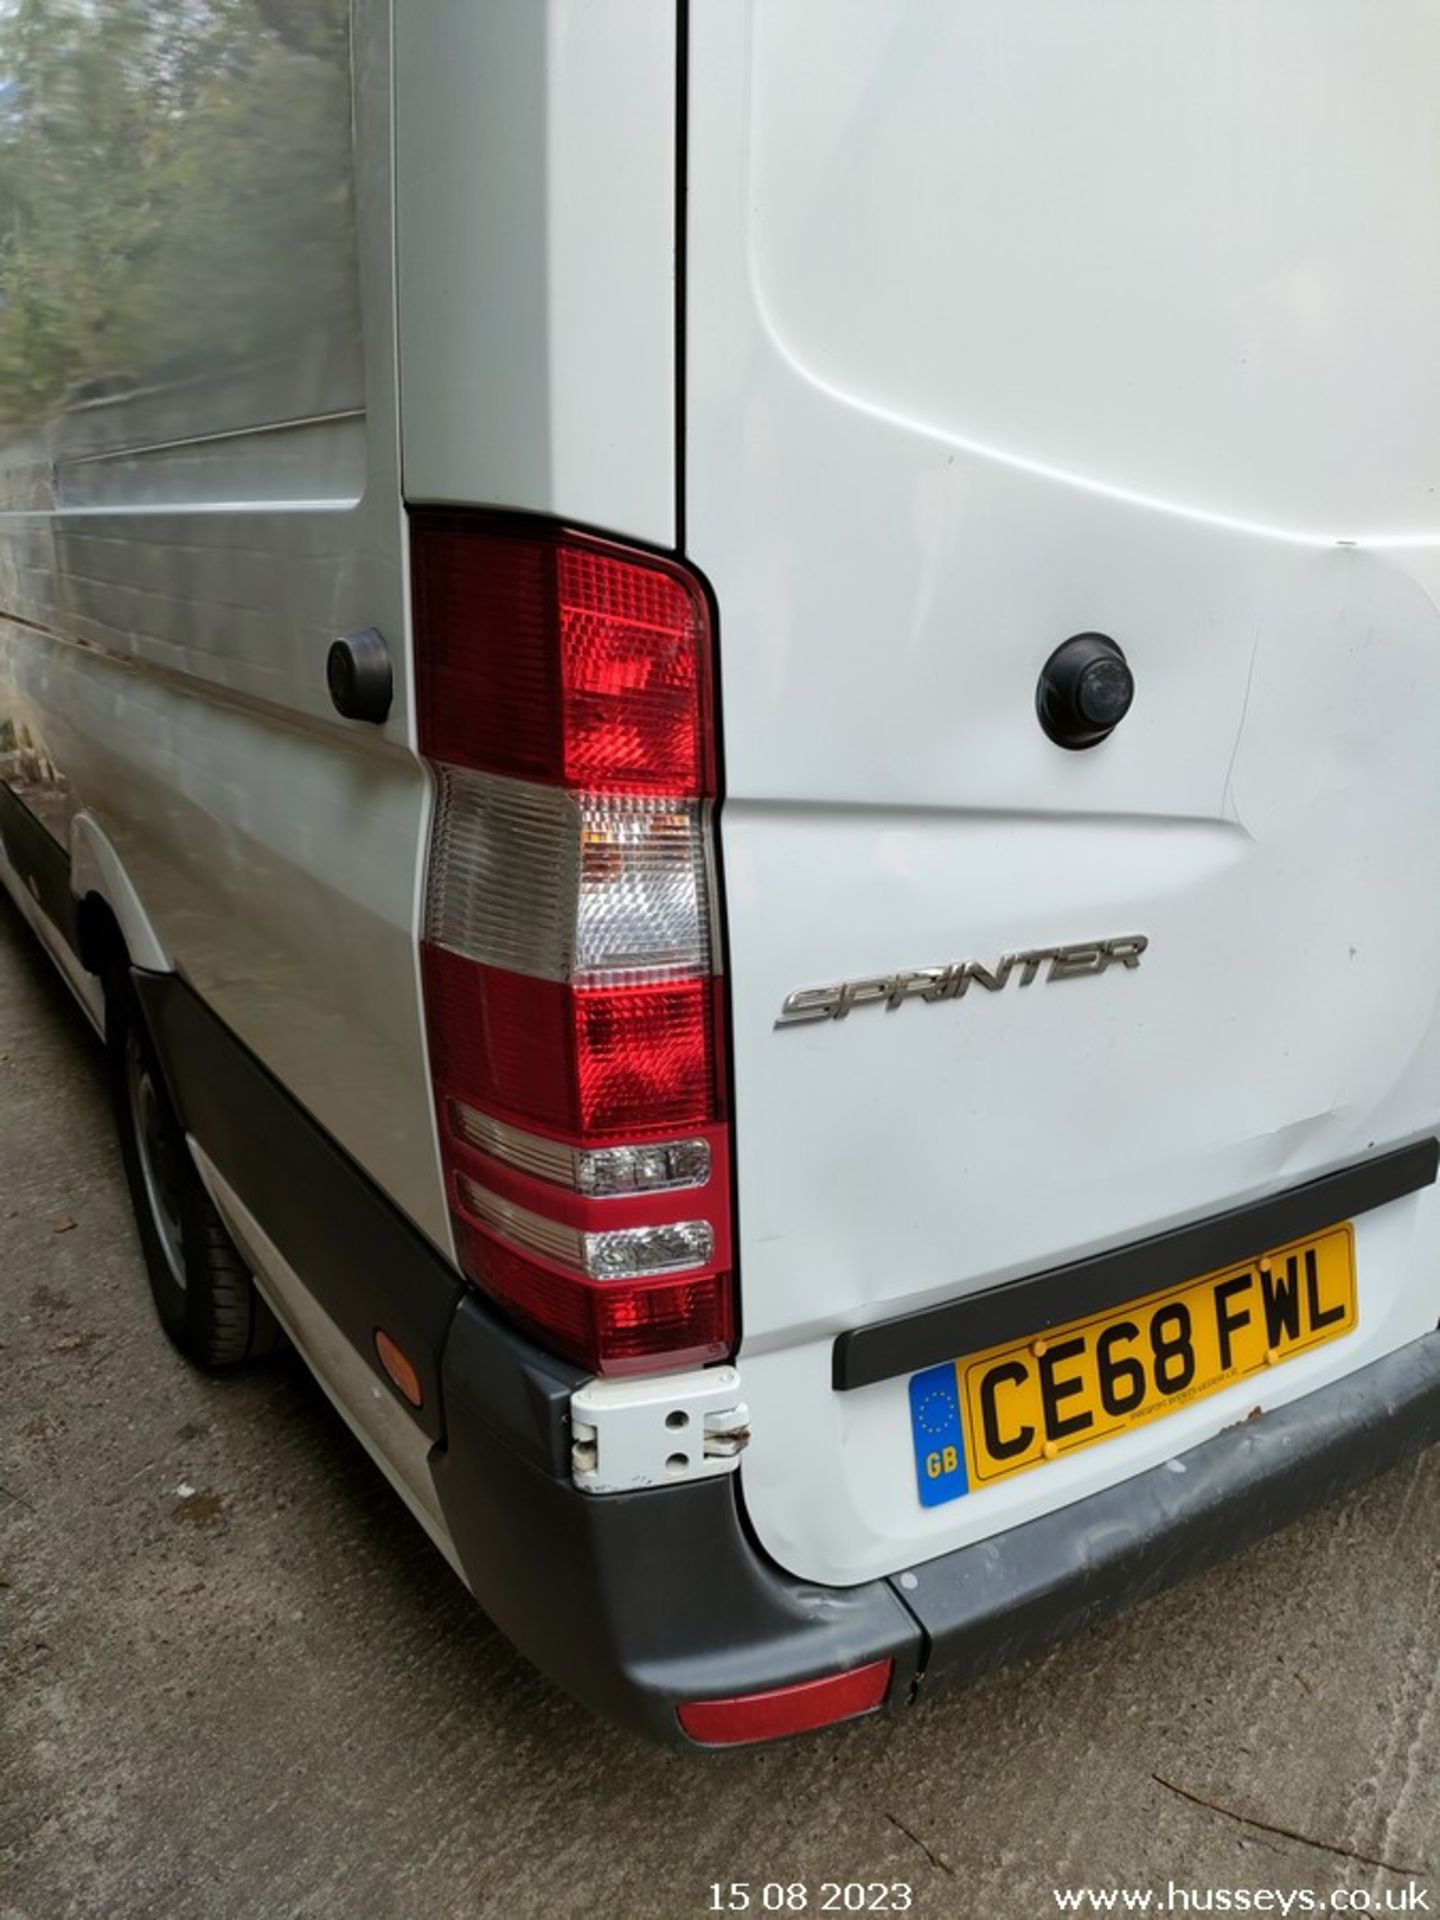 18/68 MERCEDES-BENZ SPRINTER 314CDI - 2143cc 5dr Refrigerated (White) - Image 34 of 40